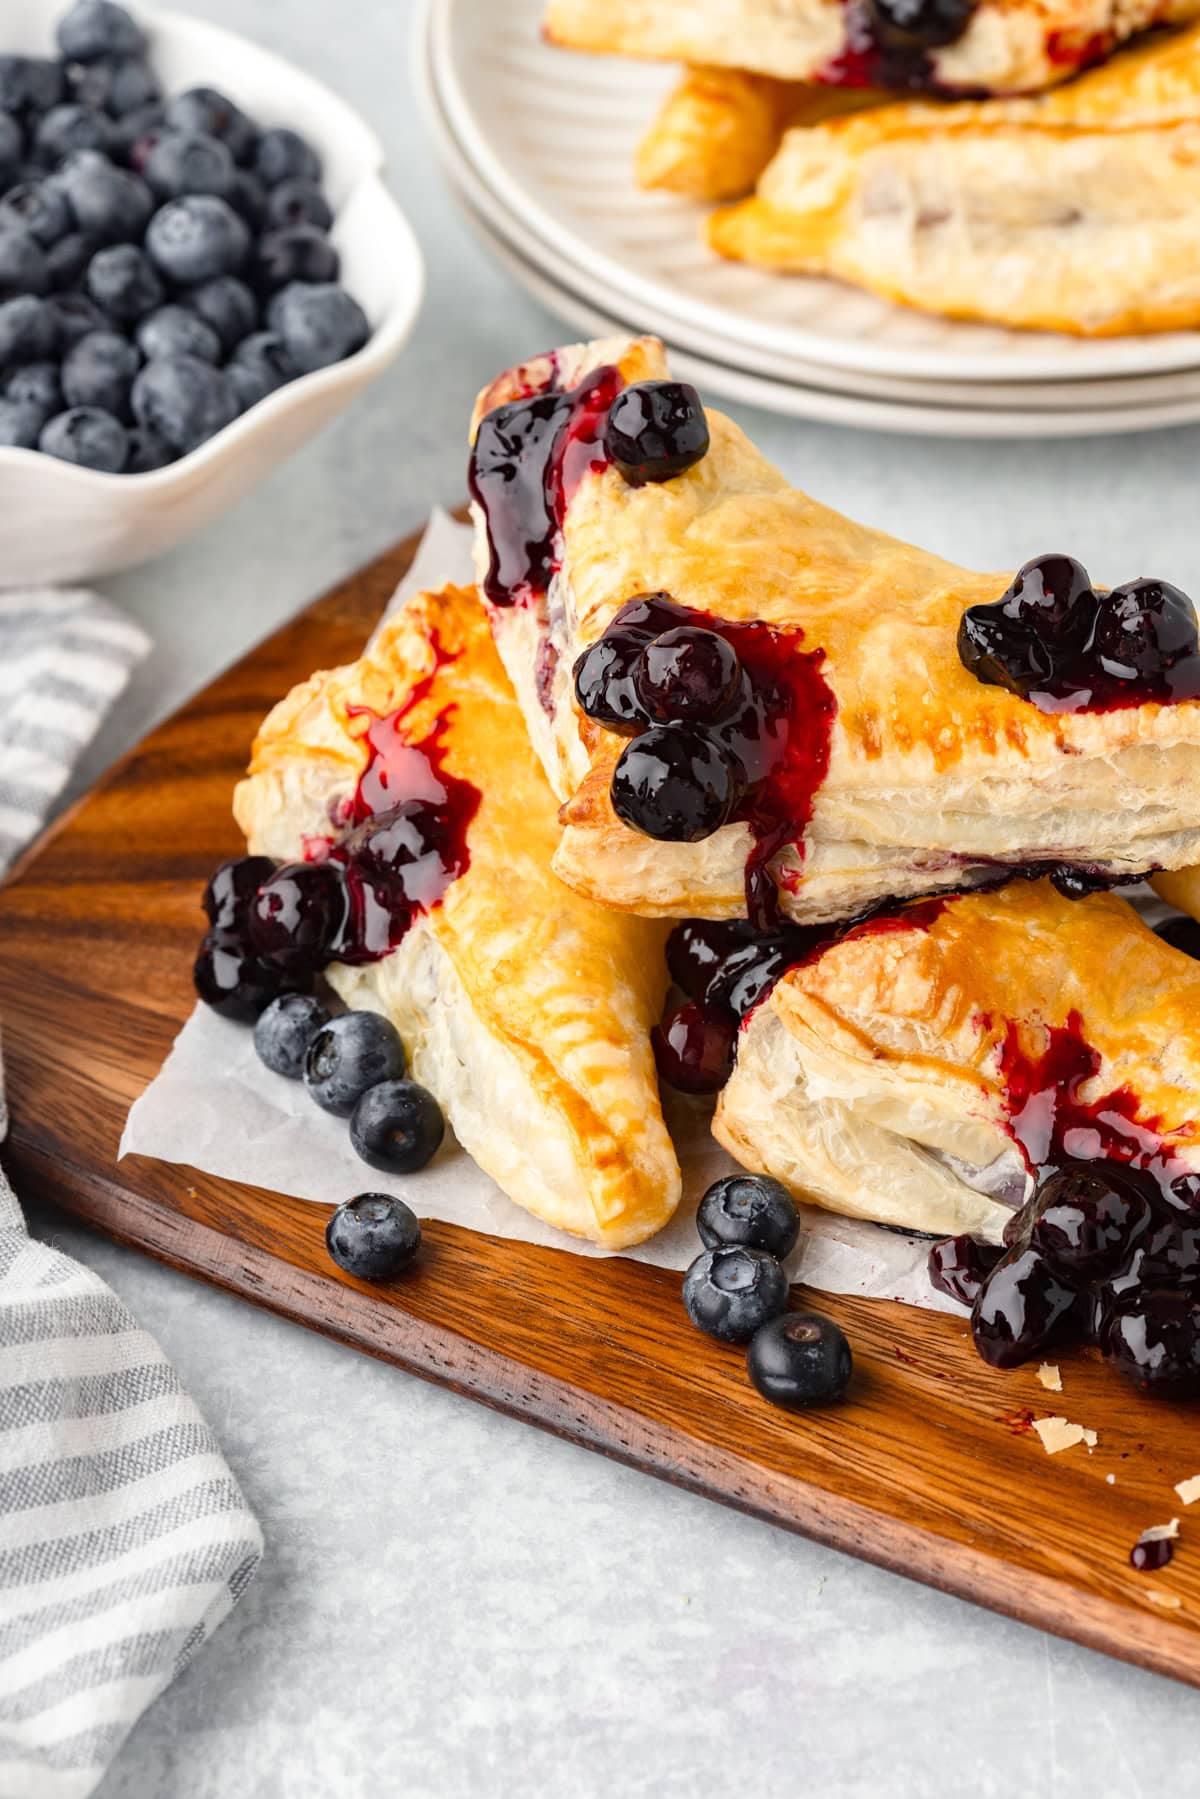 Three blueberry turnovers stacked on a wood cutting board.